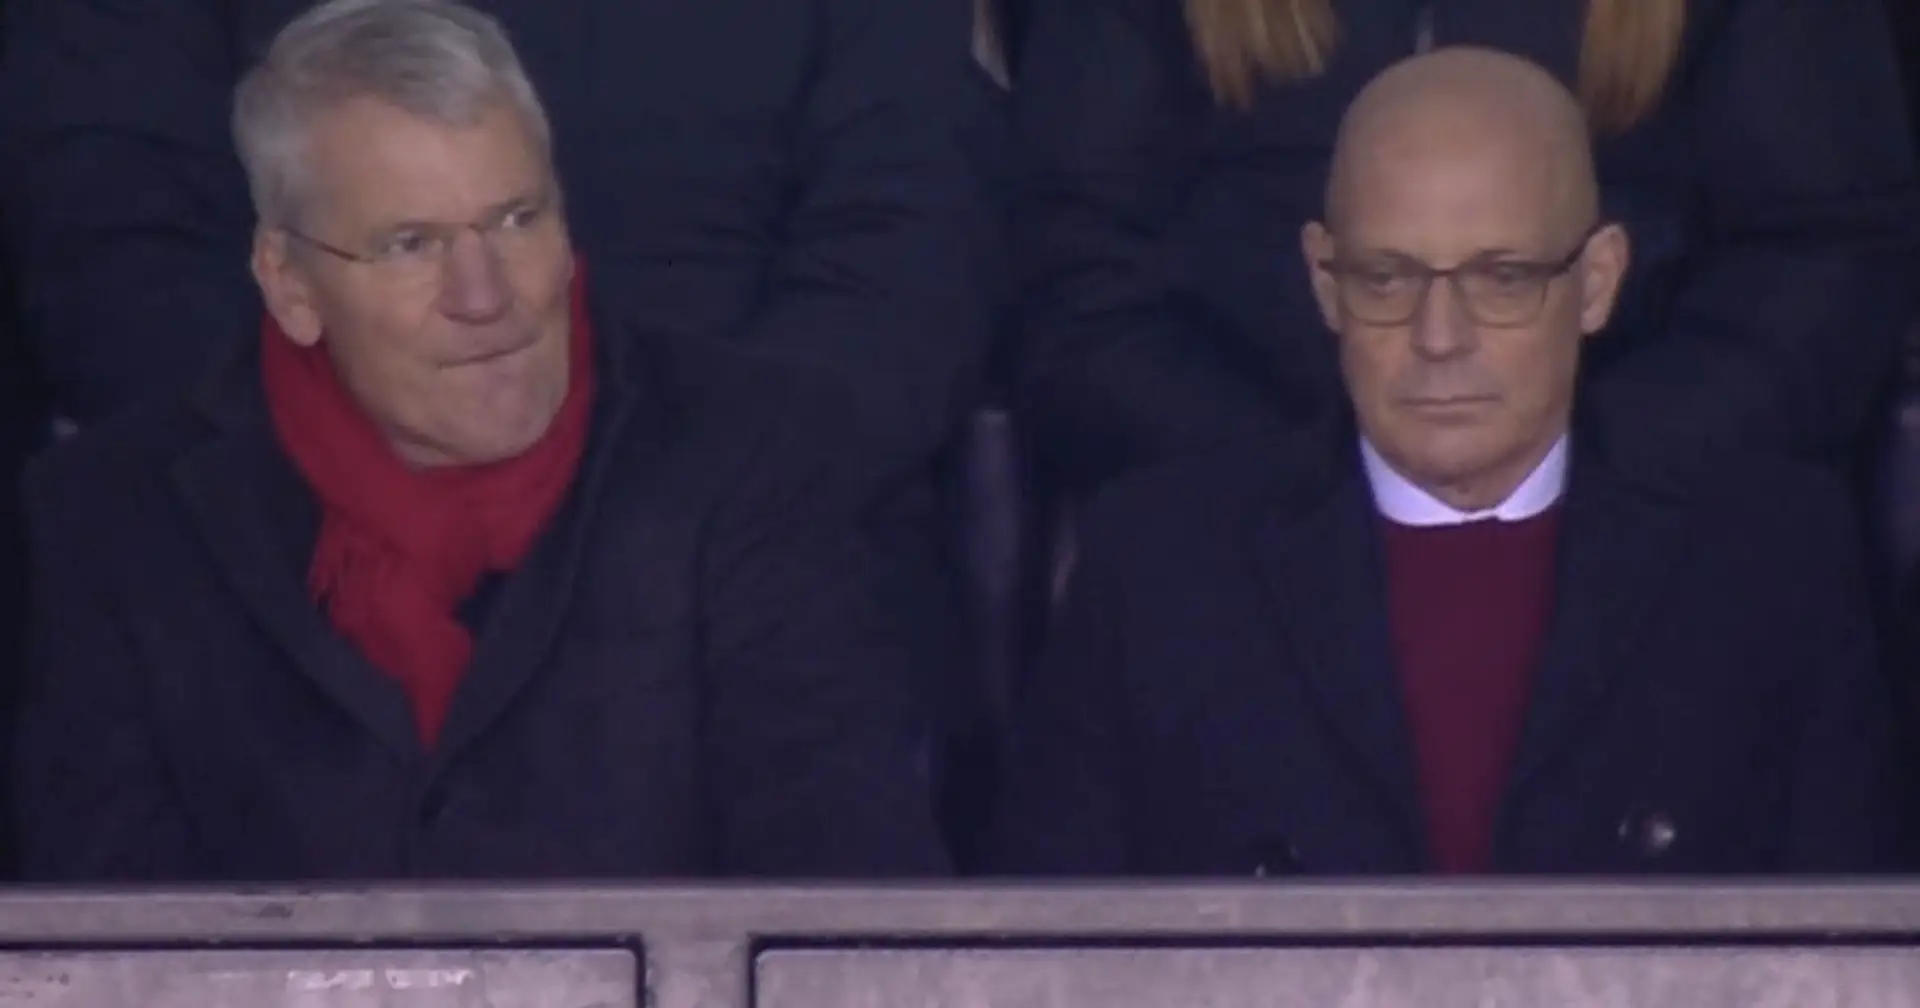 Spotted: David Gill watches Man United beat Wigan beside Dave Brailsford amid return links